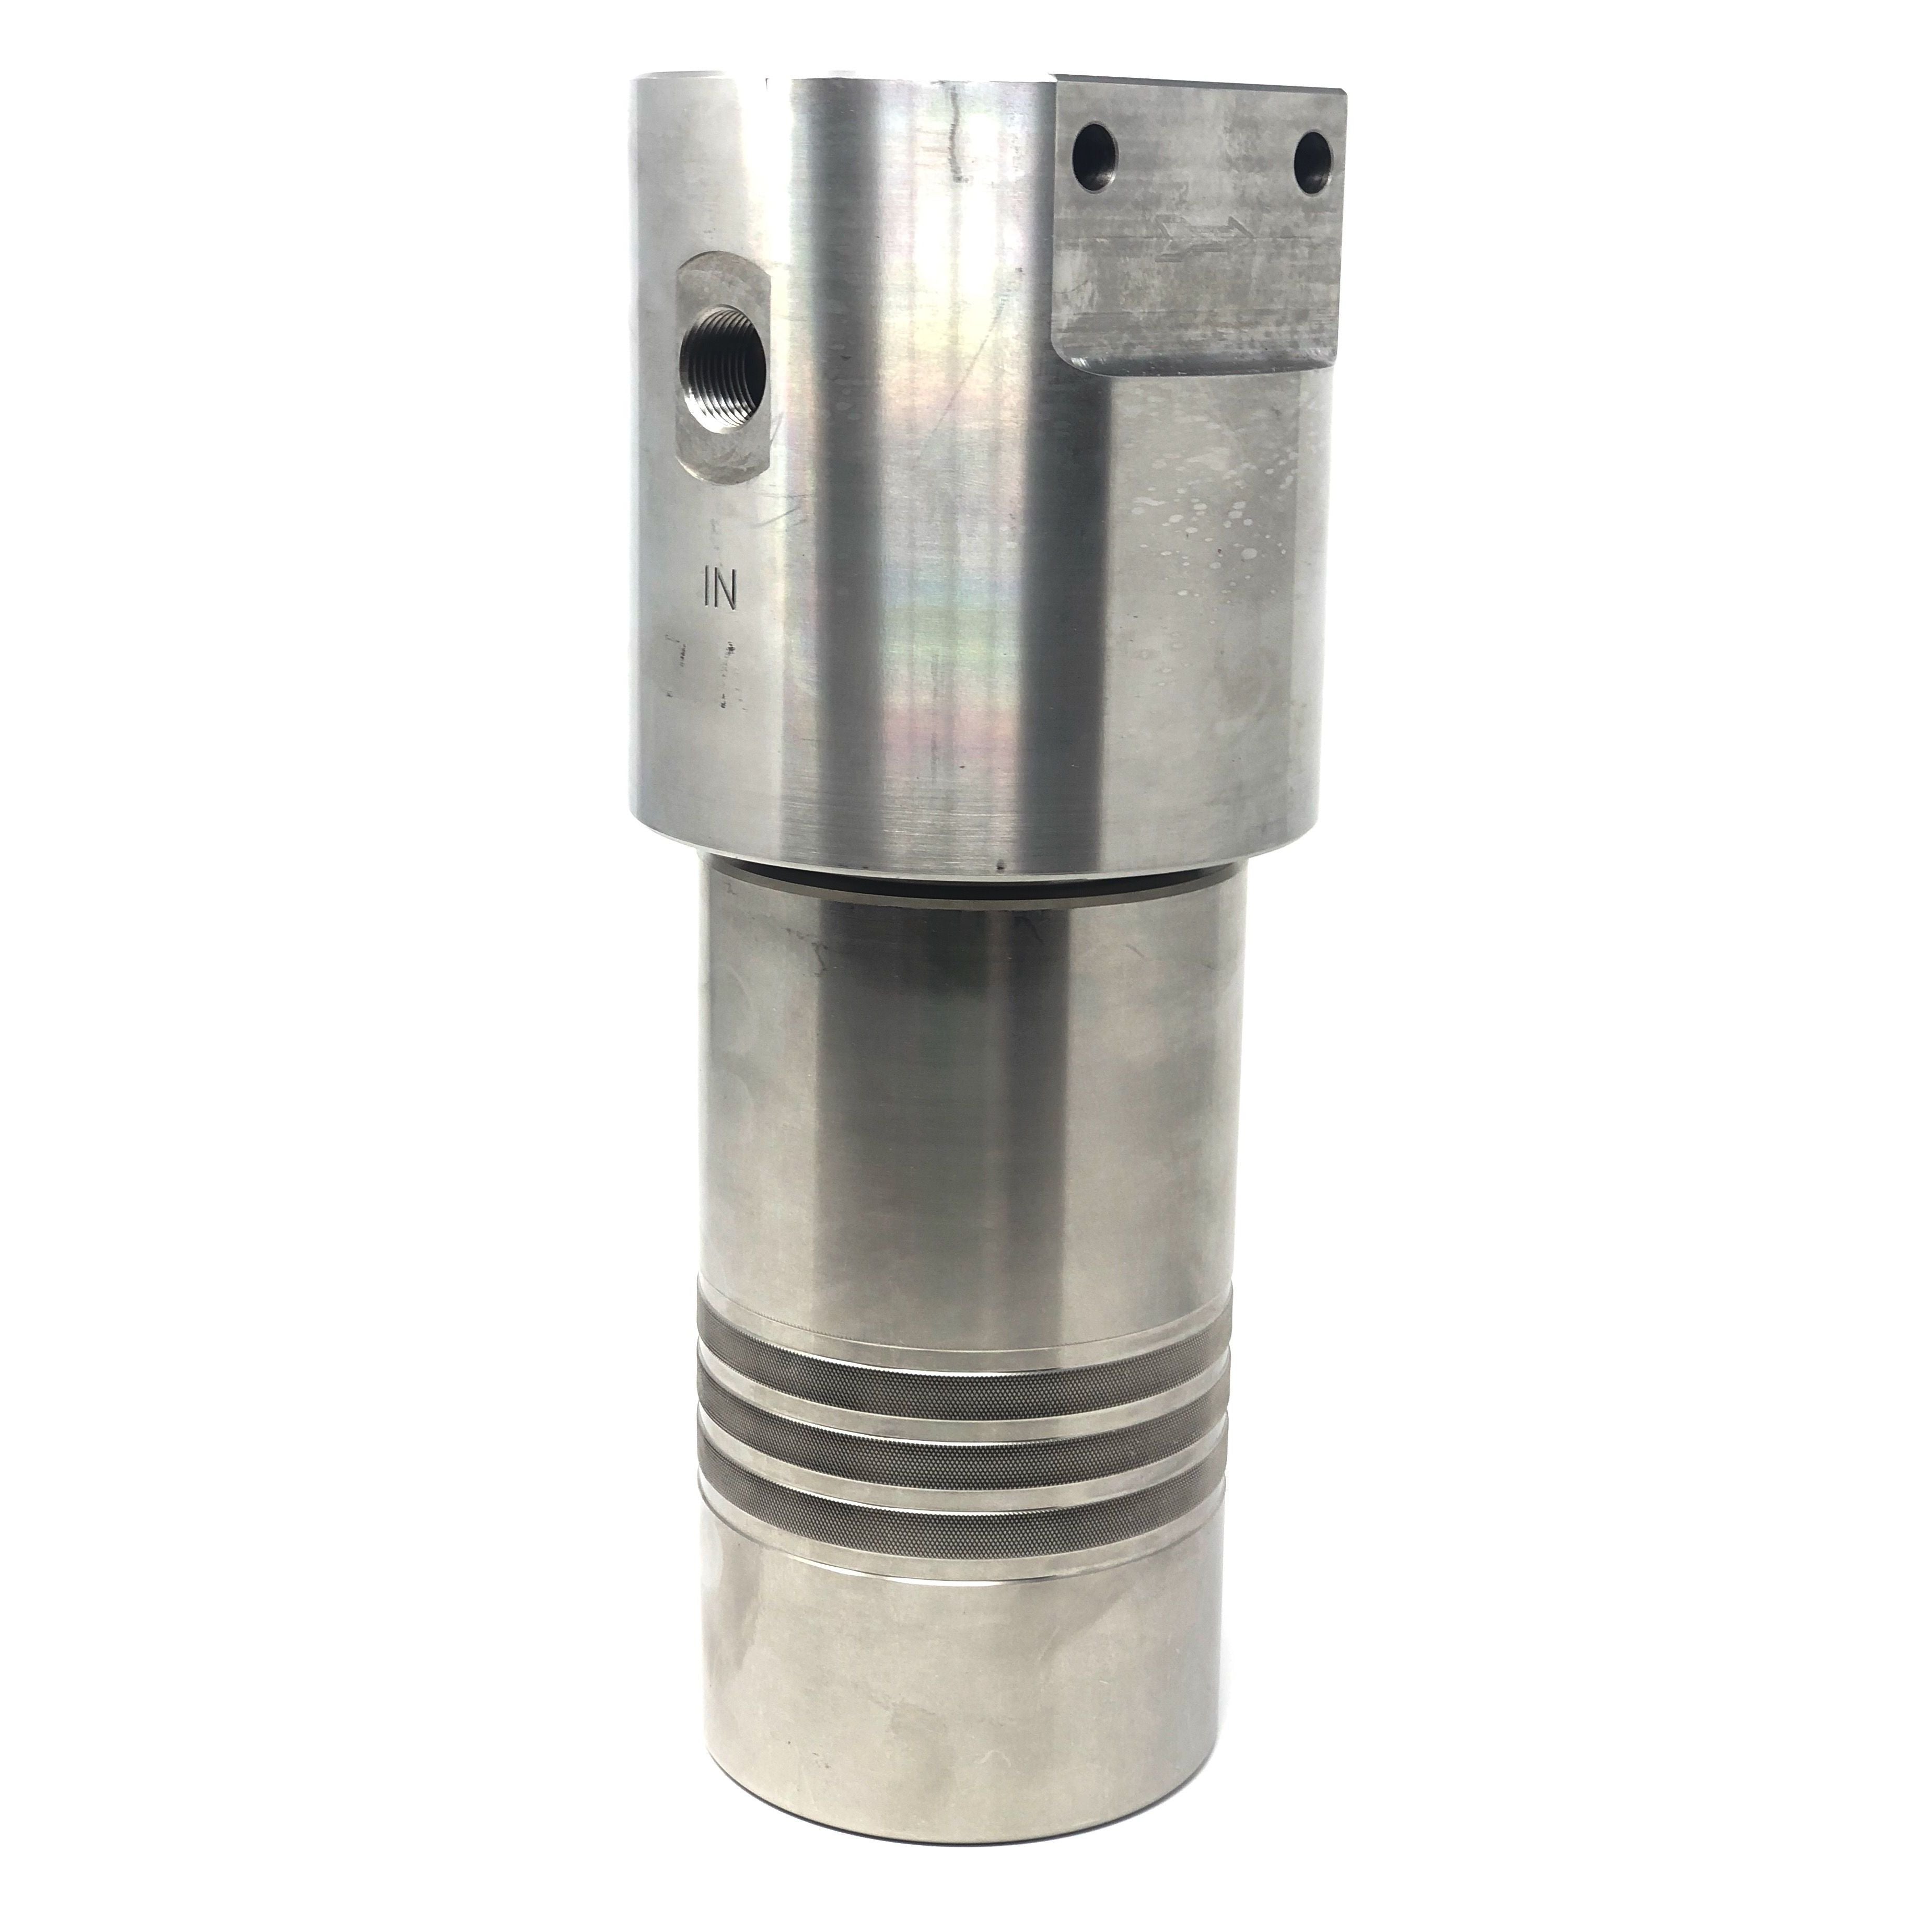 52S-248N-100SEN : Chase Ultra High Pressure Inline Filter, 10000psi, 1/2" NPT, 100 Micron, With Visual Indicator, No Bypass